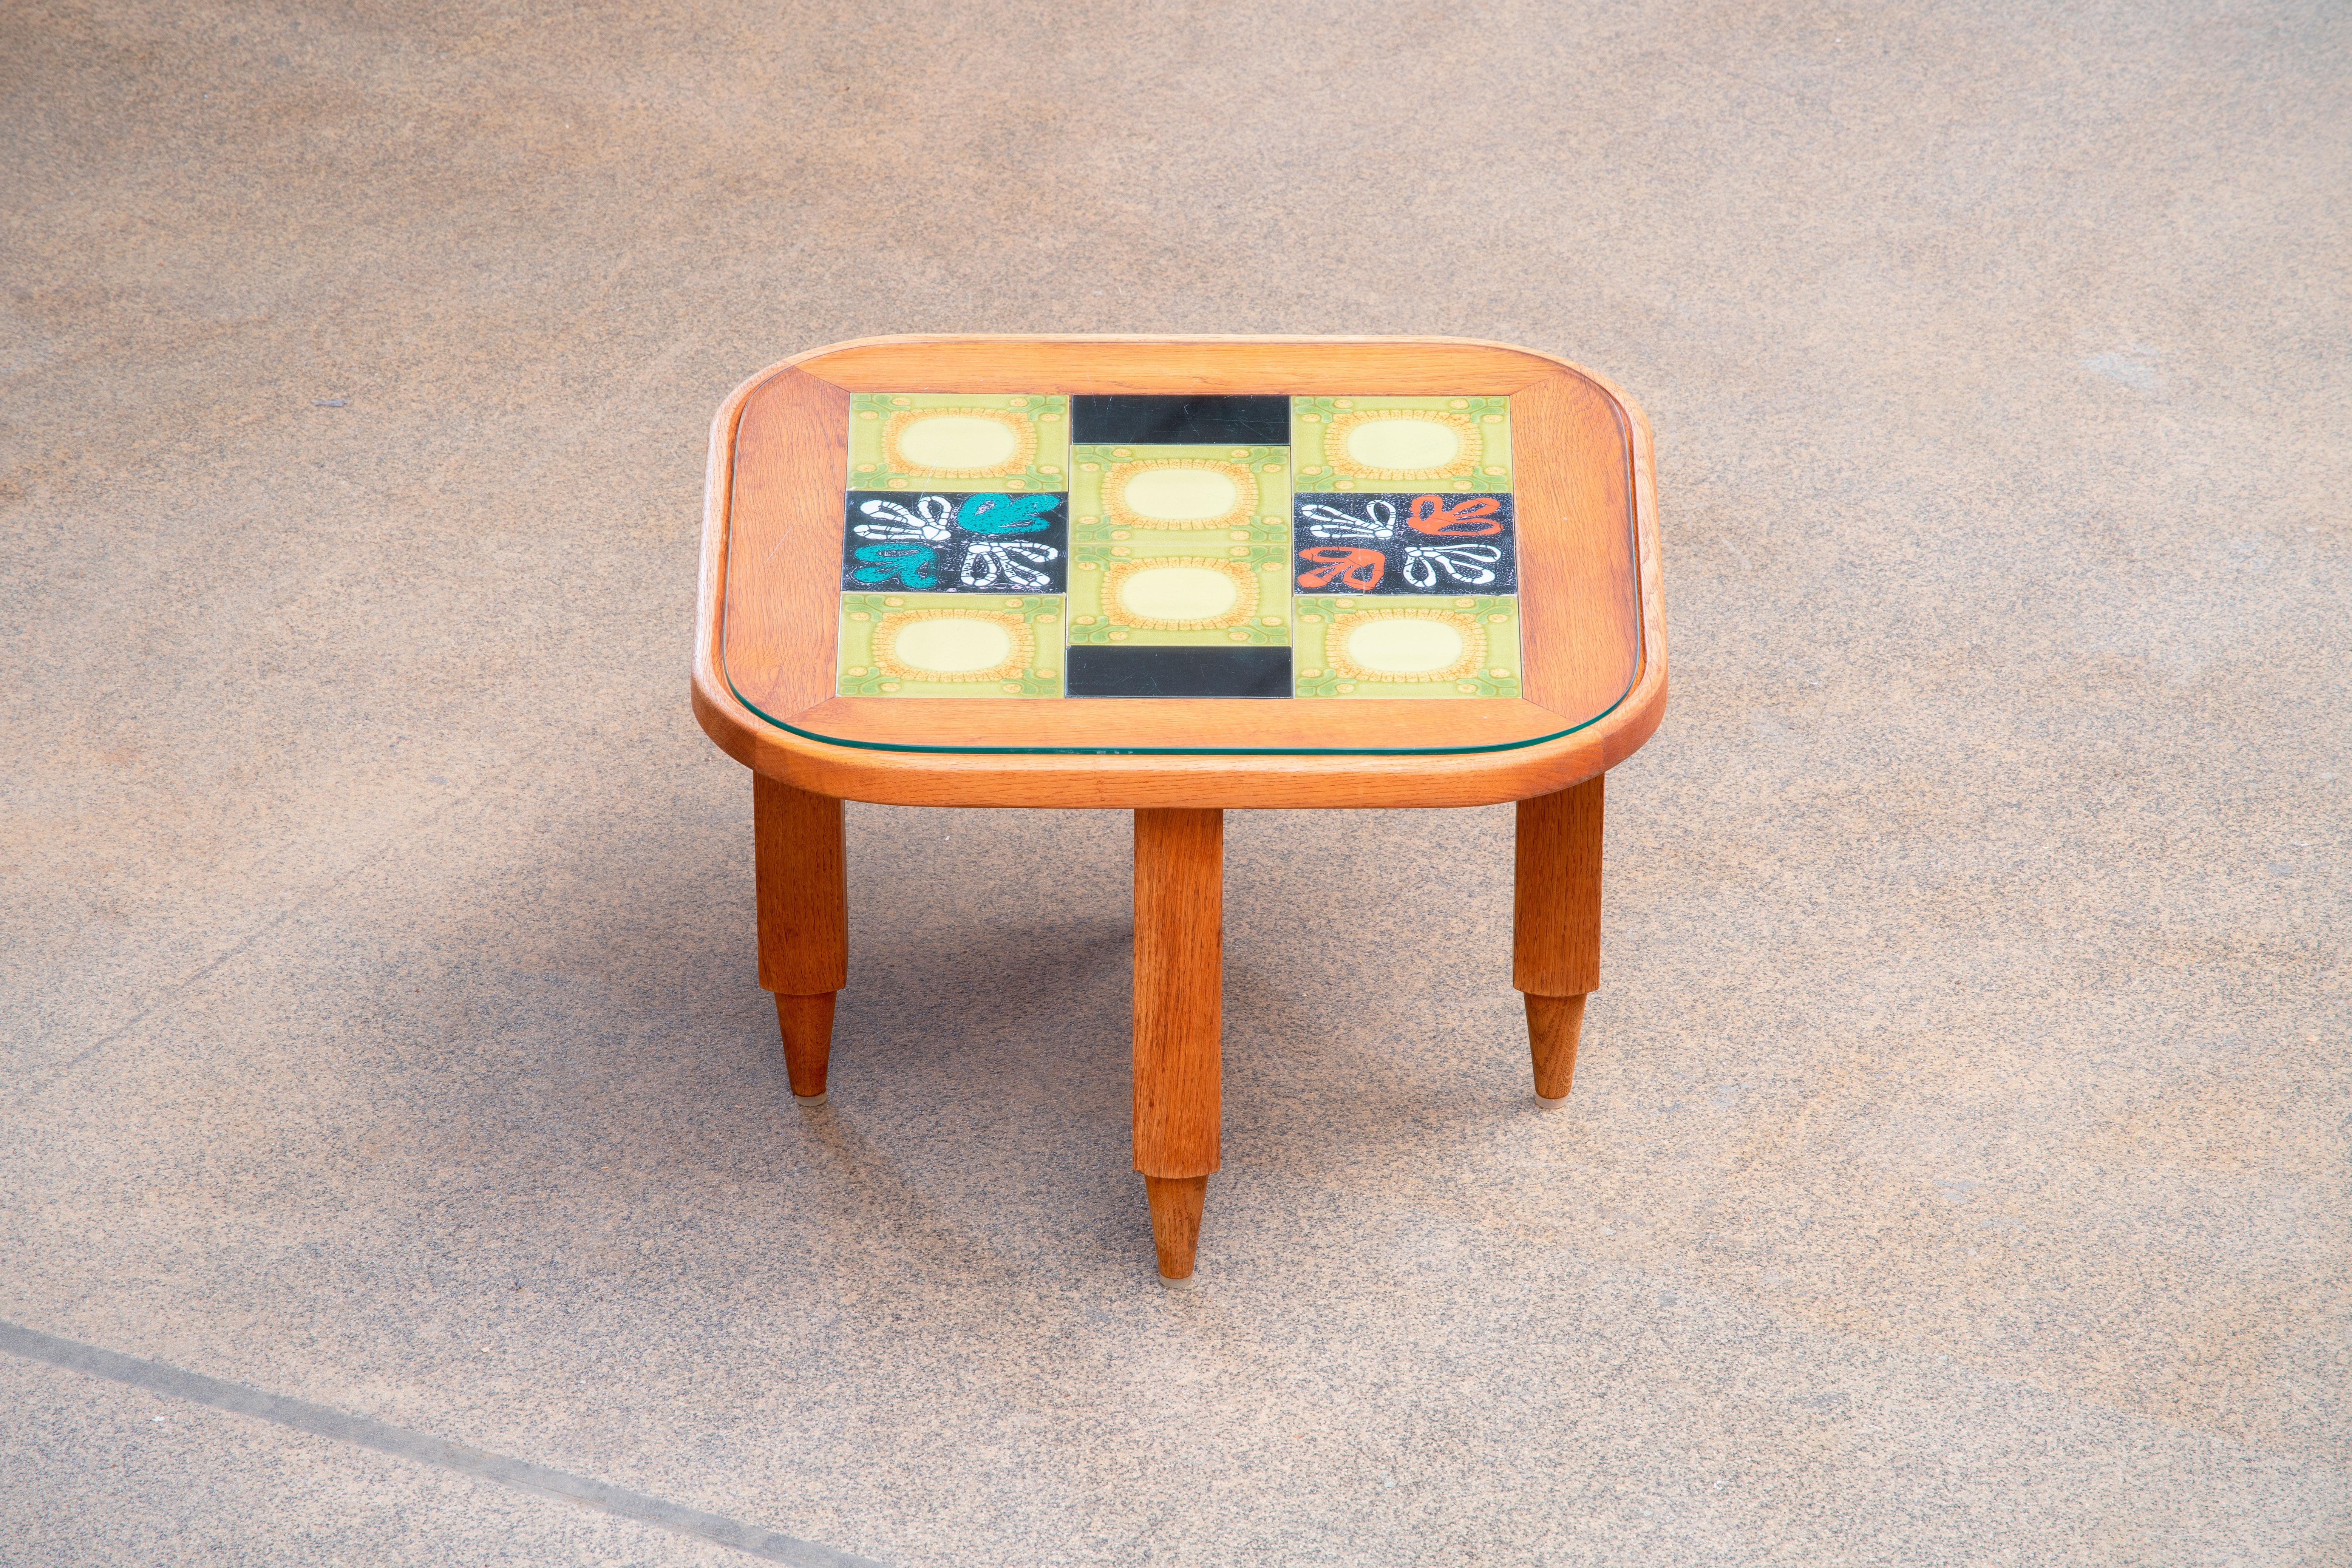 Round oak coffee table with beautiful colored ceramic tiles in the top. The materials and forms of this table show the characteristics of the French designers Guillerme et Chambron. They combine classical forms with modern design and a touch of the